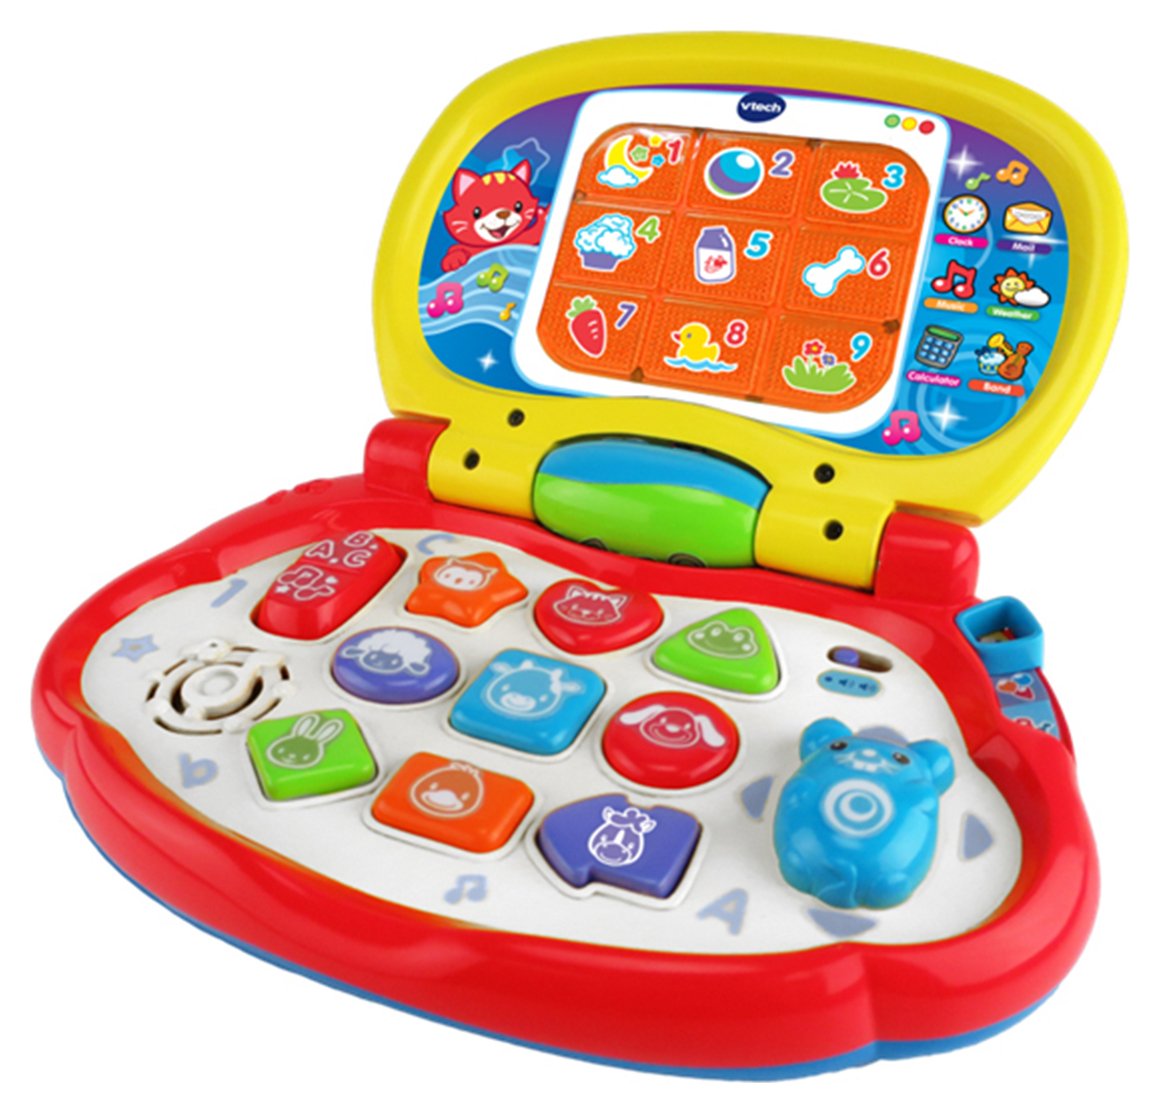 VTech Baby's First Laptop Review